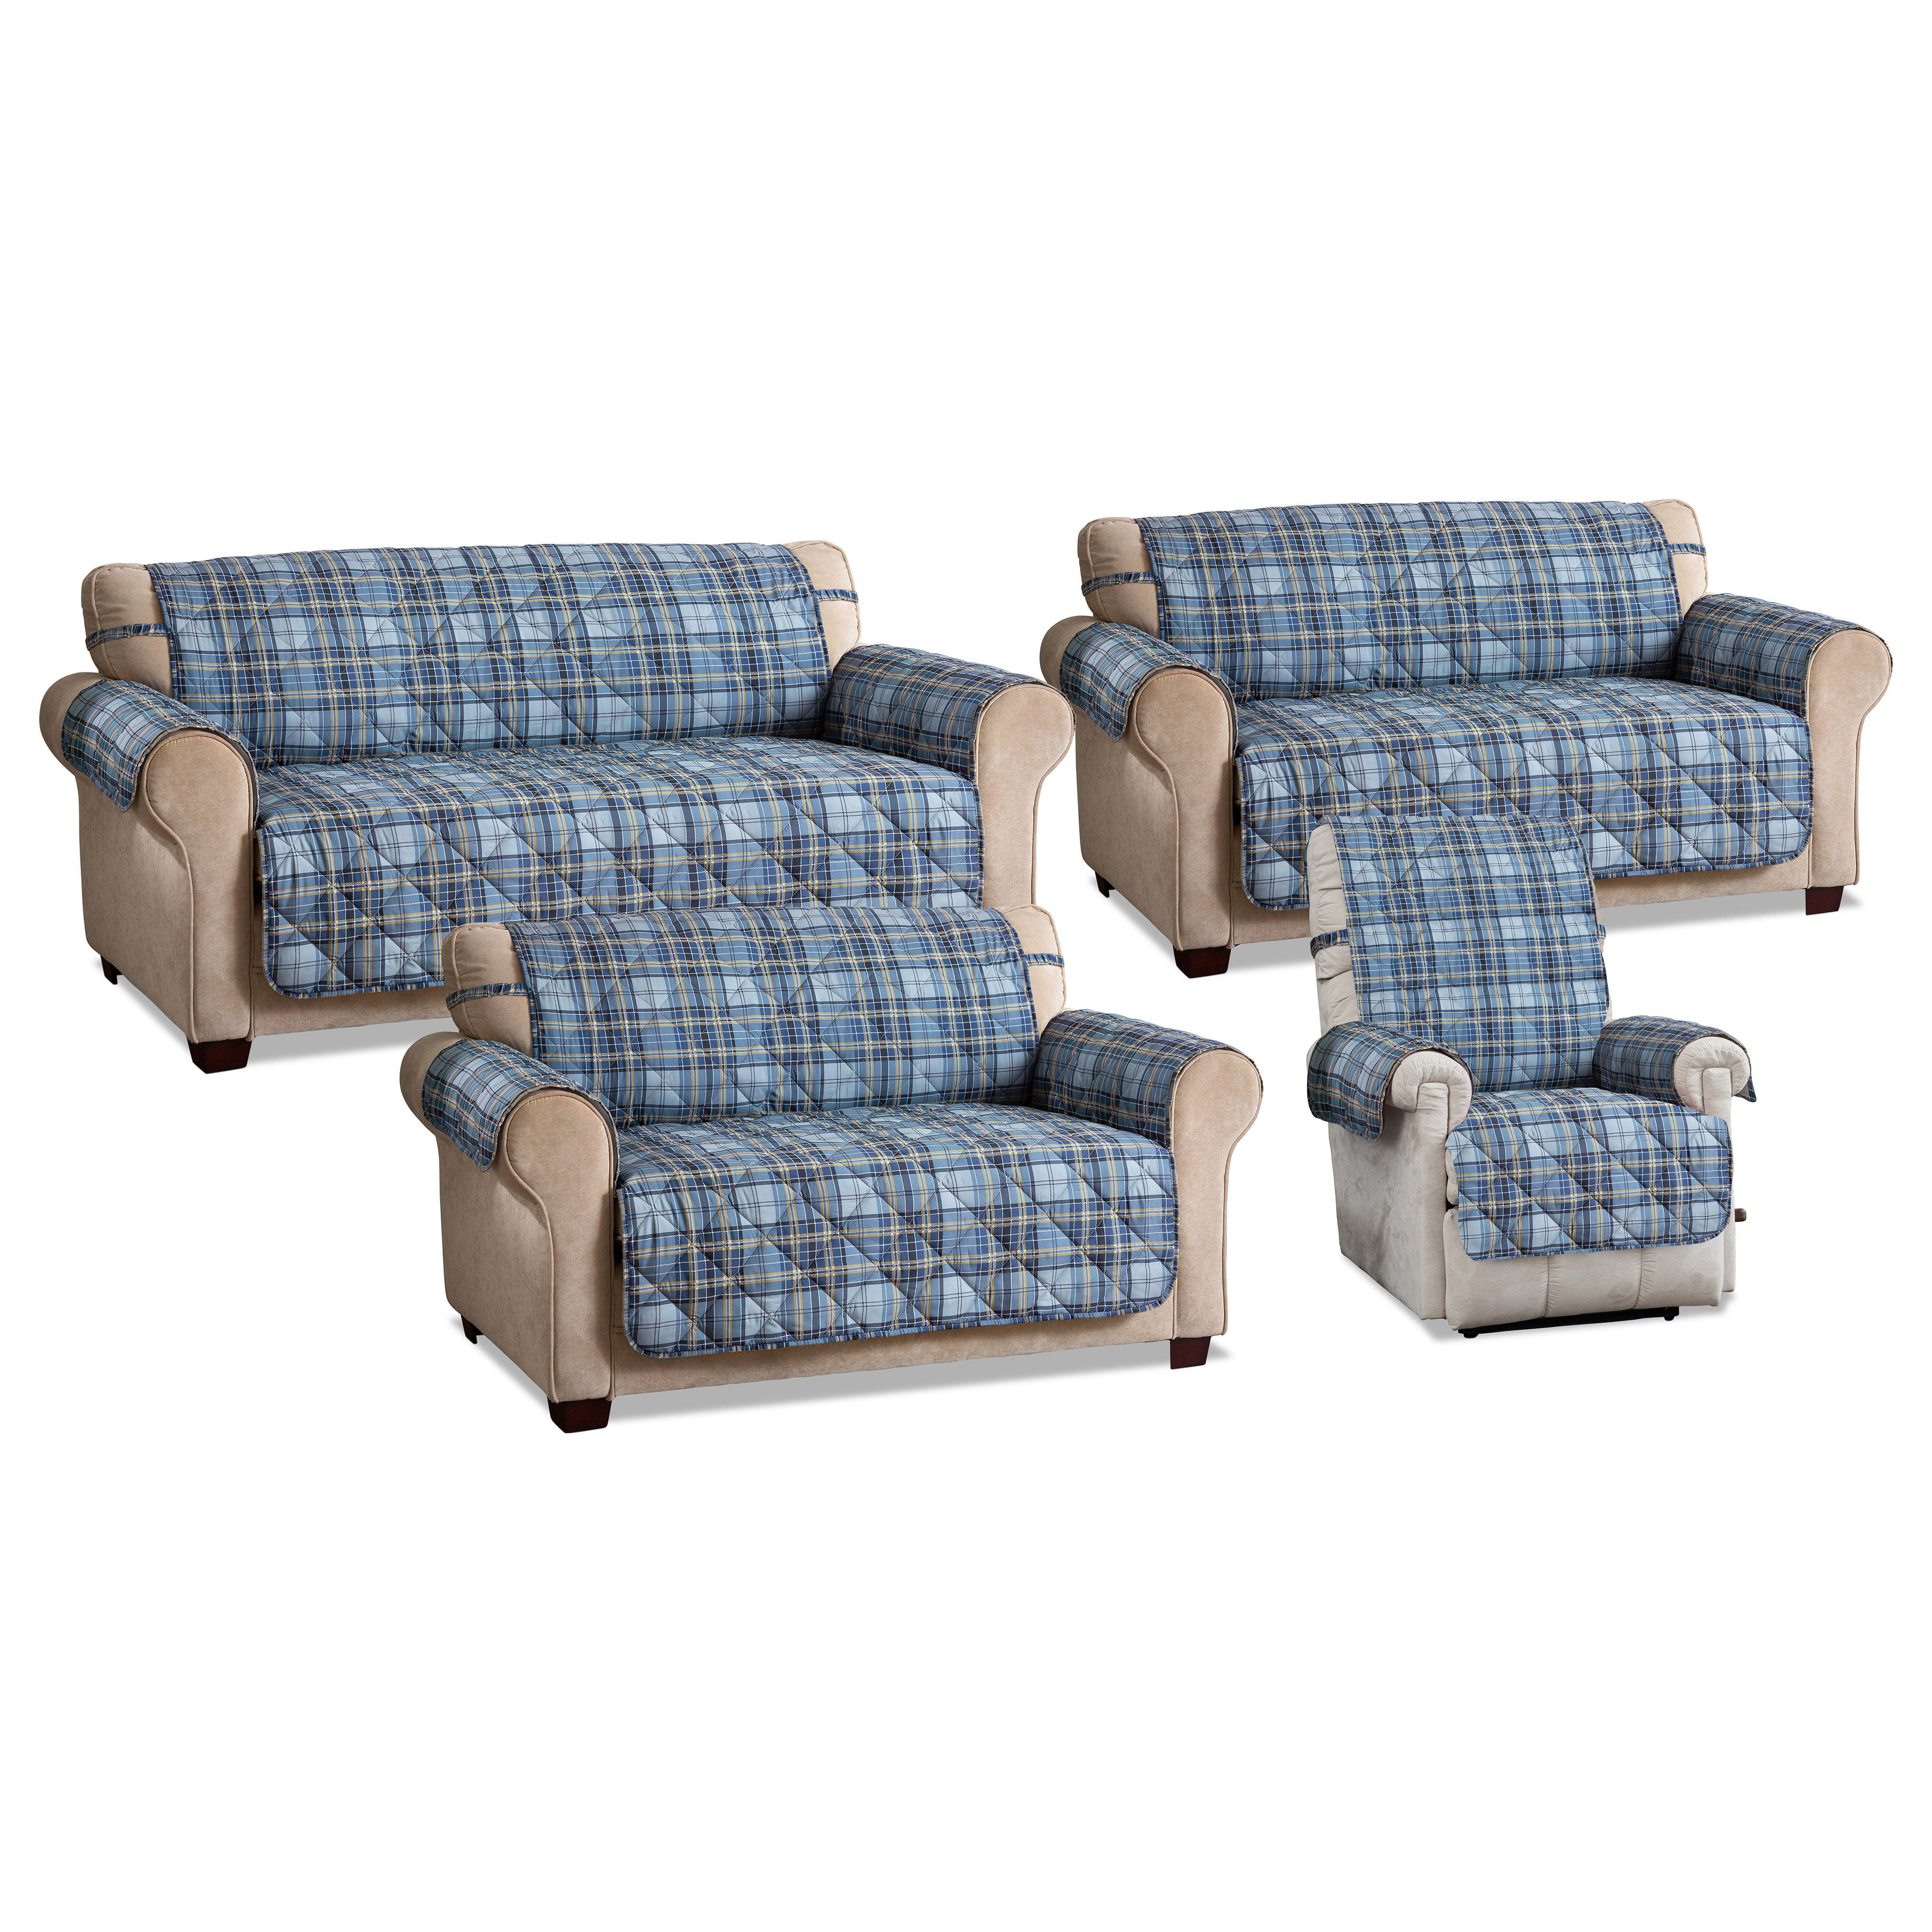 Plaid IN Coral Milan Single Bed Sofa Blue Official Product 130 X 160 C